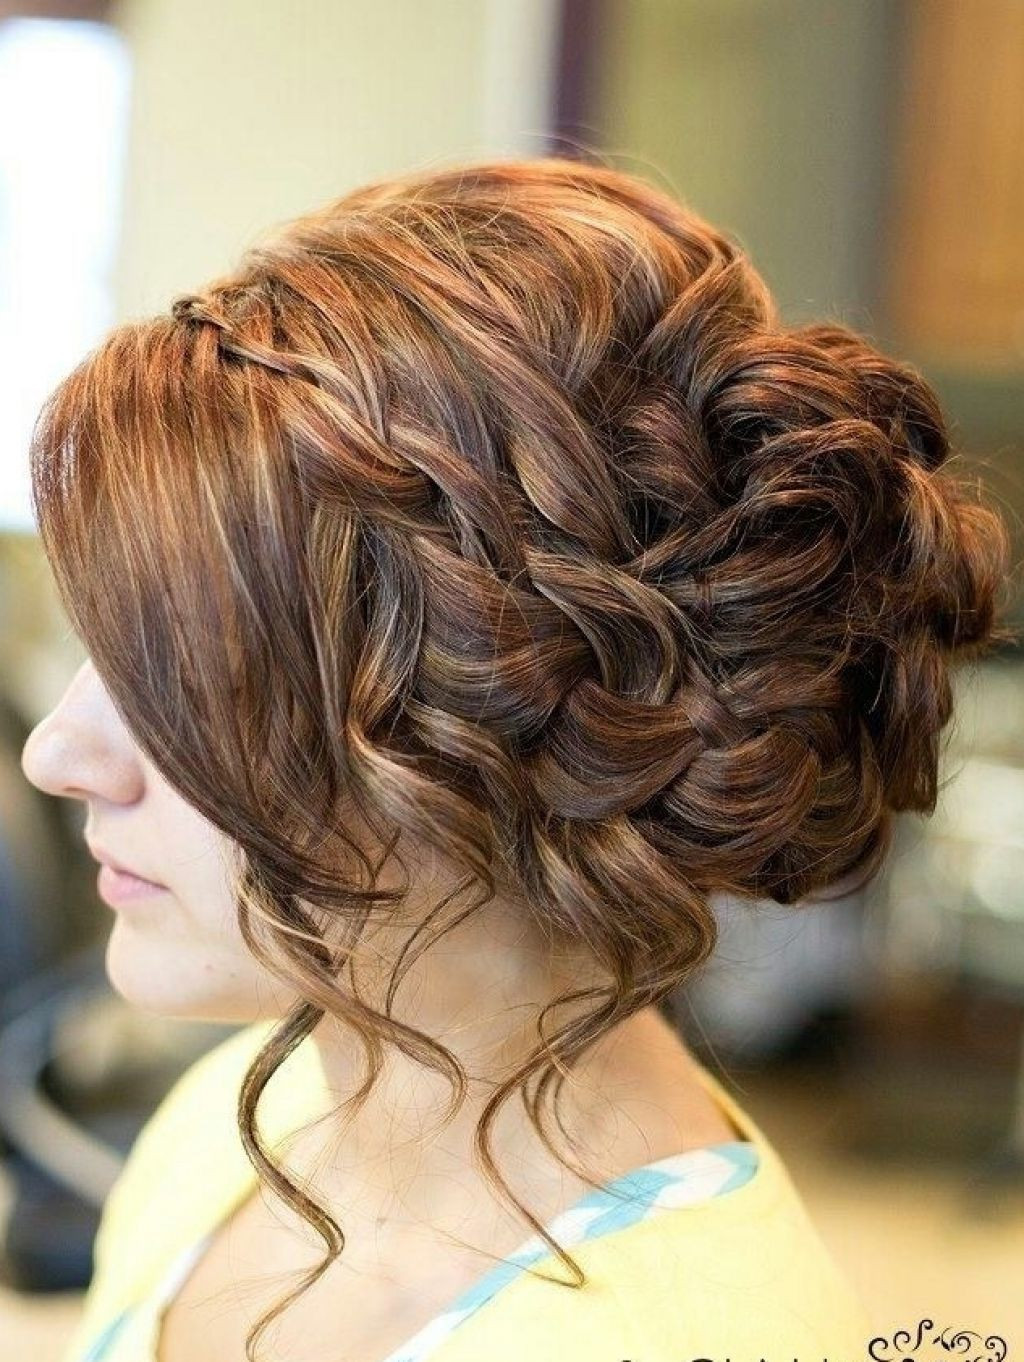 Prom Hairstyles Up
 14 Prom Hairstyles for Long Hair that are Simply Adorable